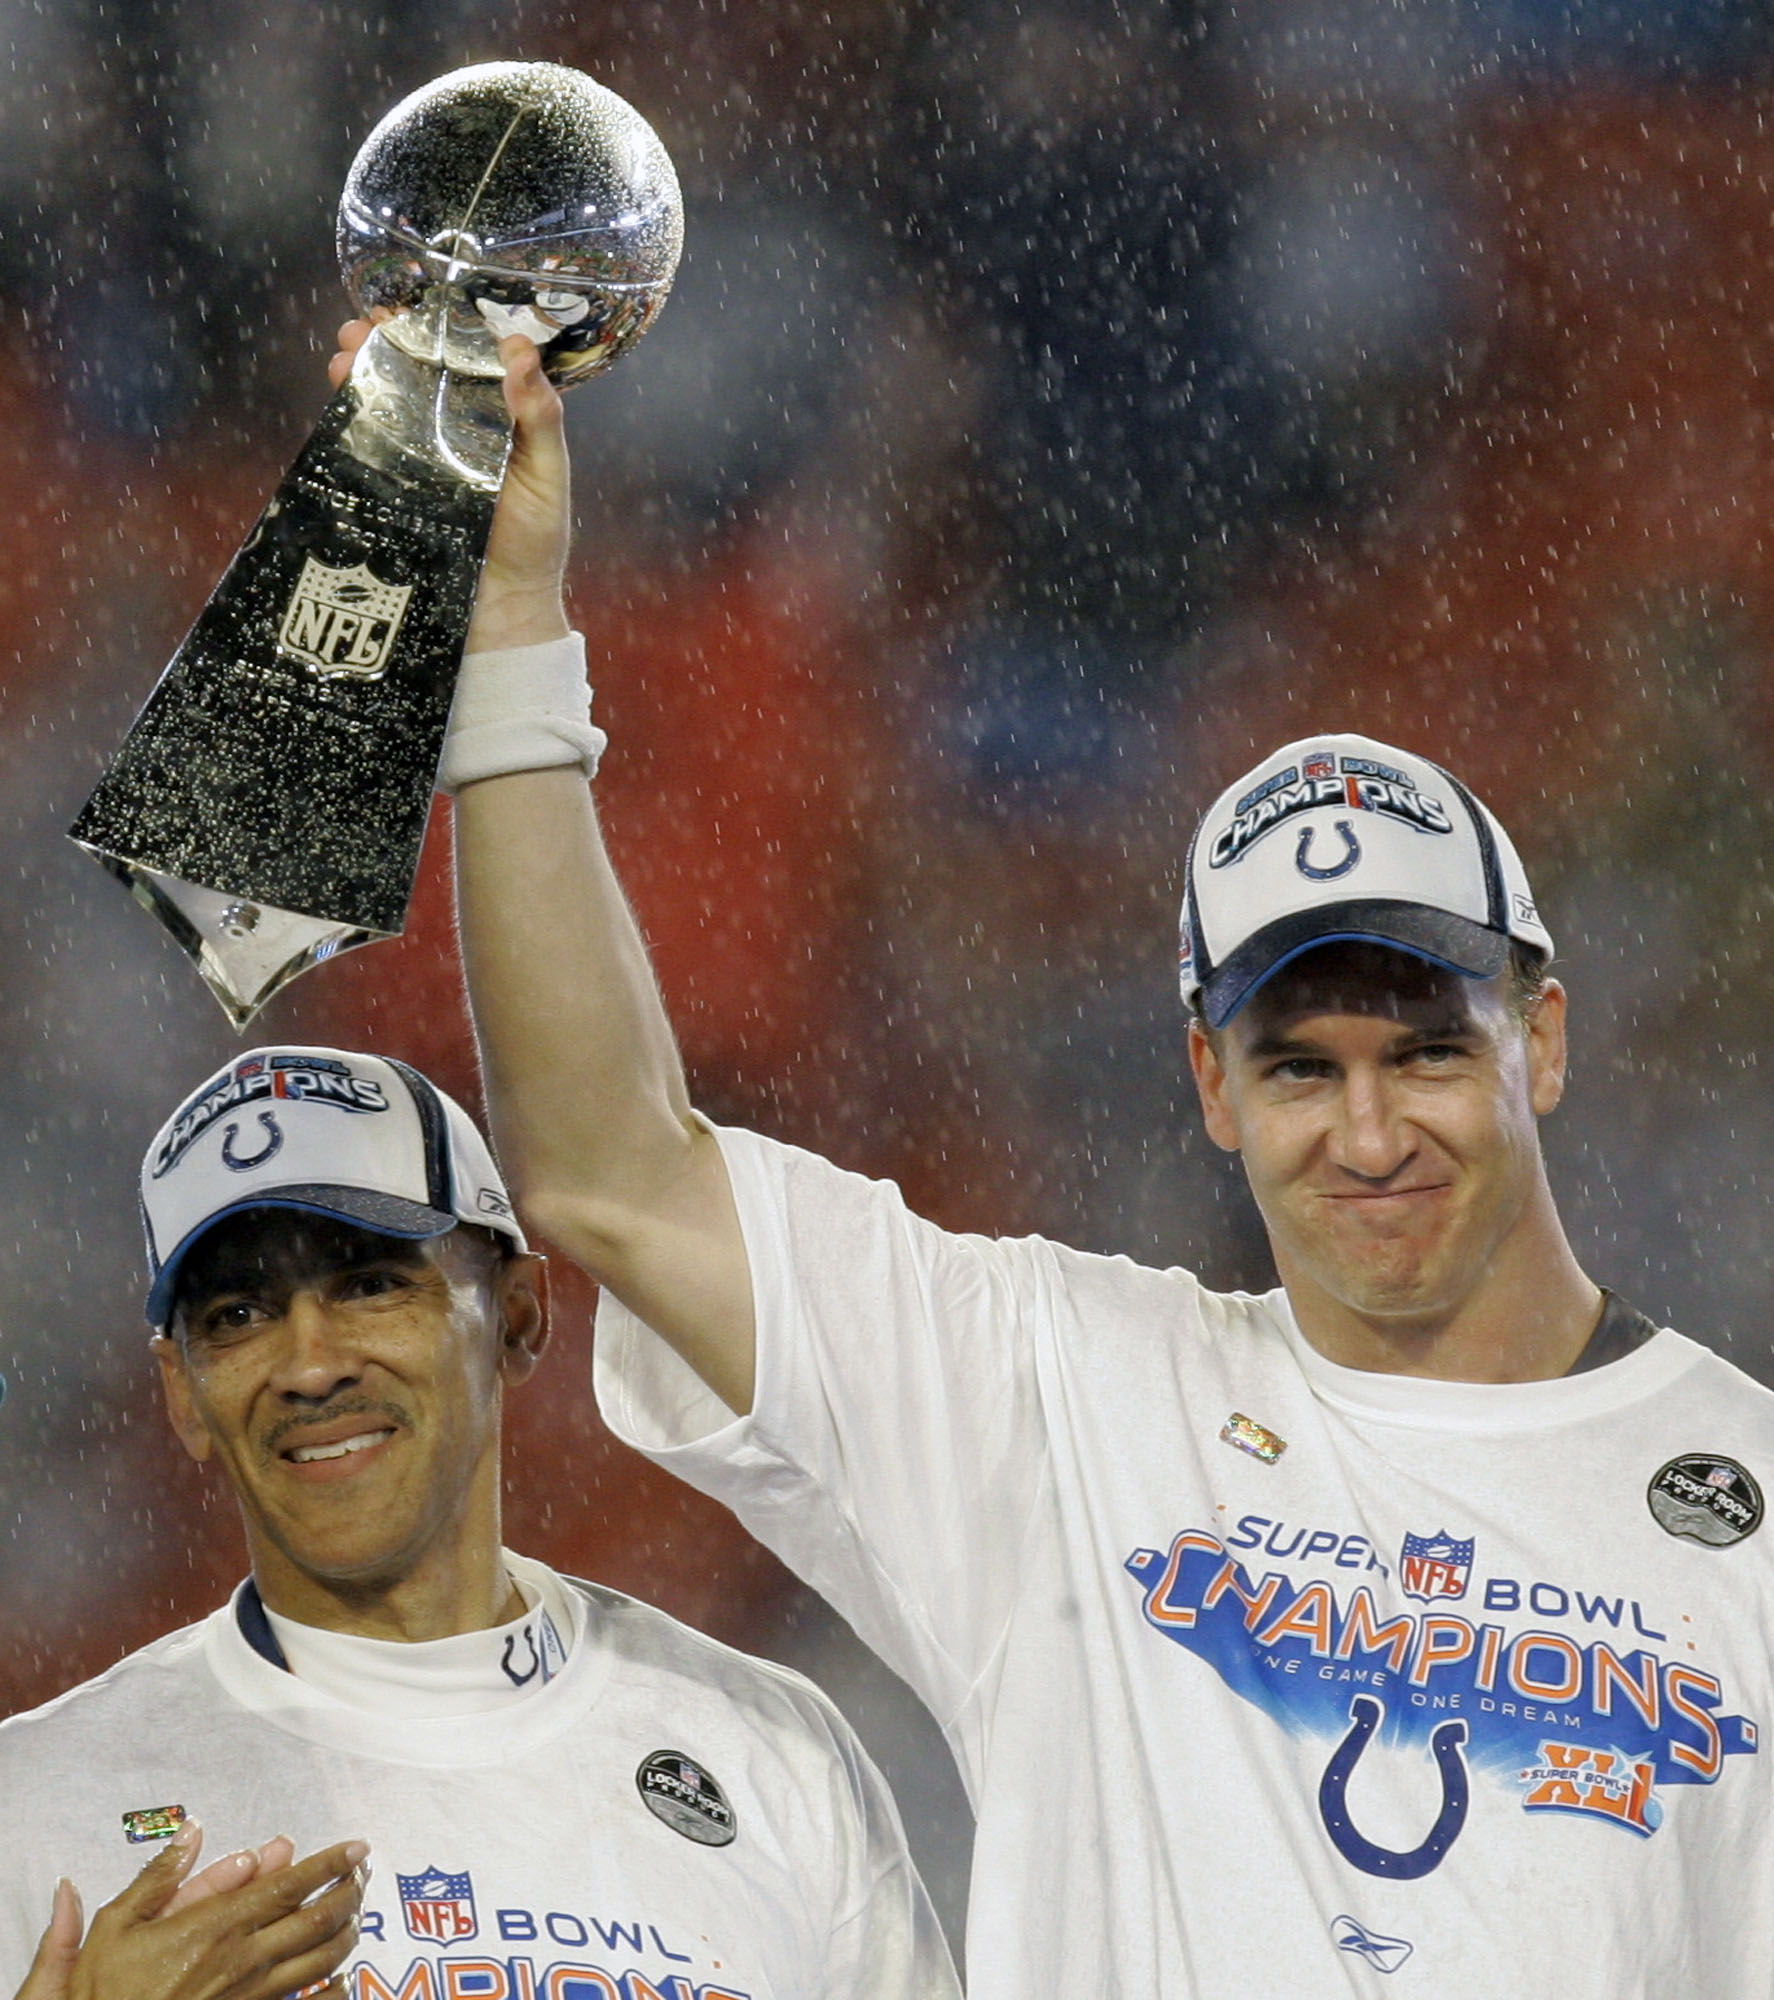 Colts won their first Super bowl in Indianapolis in 2007.